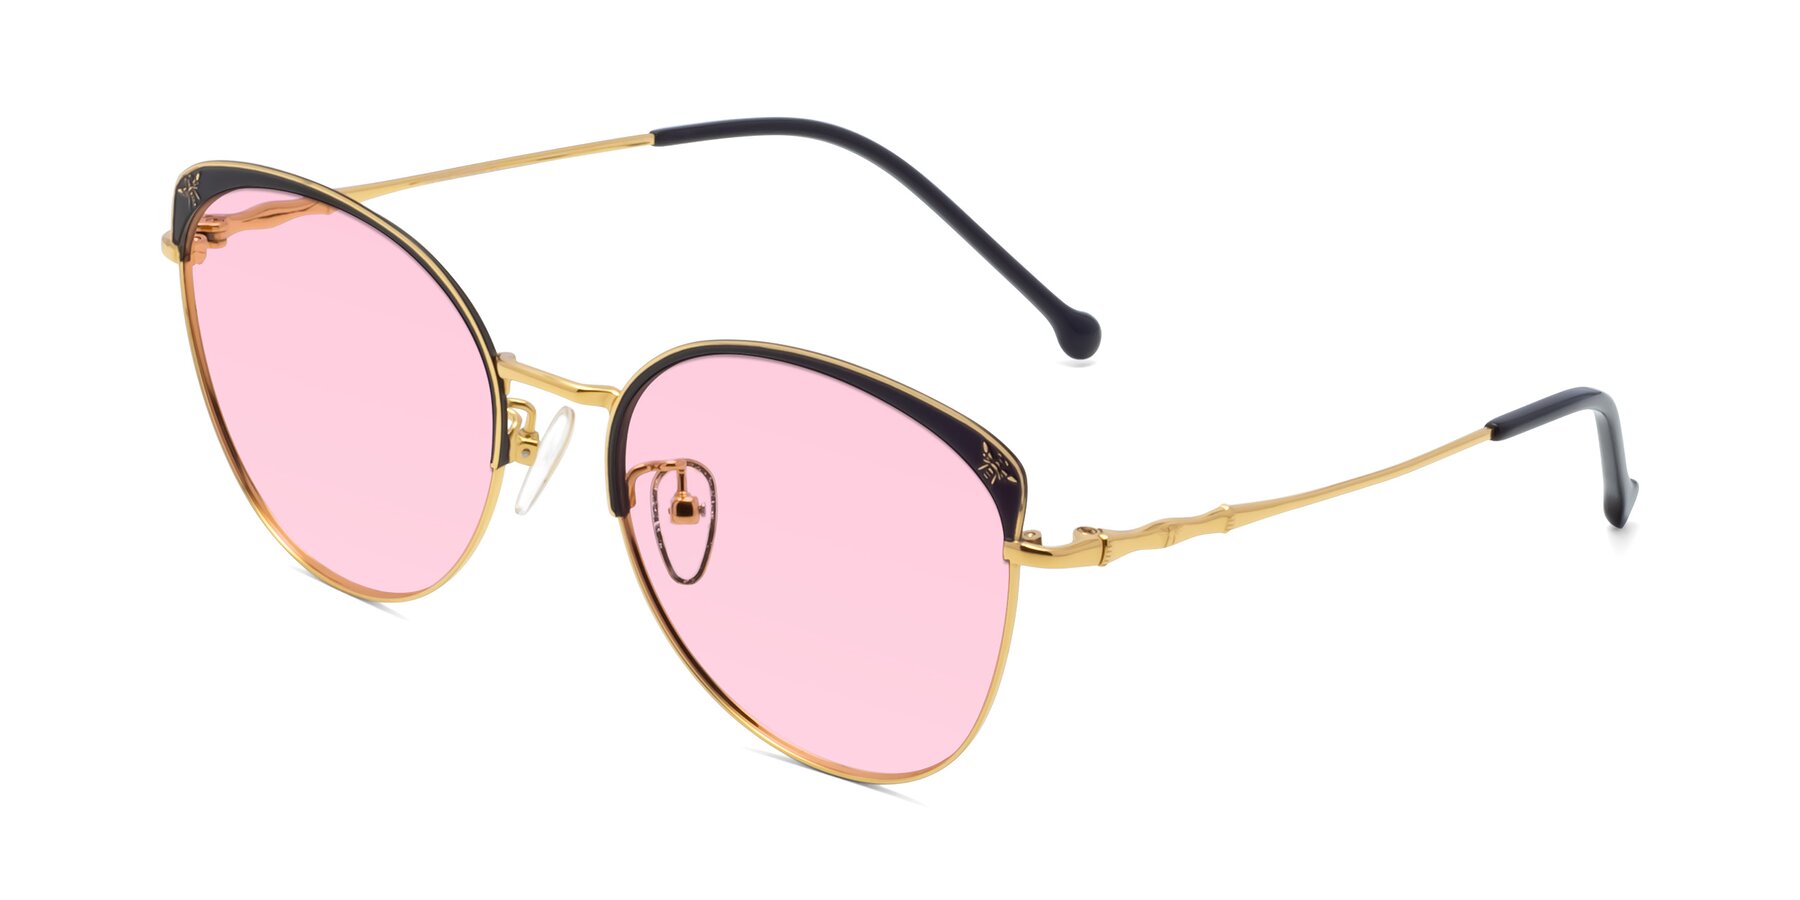 Angle of 18019 in Black-Gold with Light Pink Tinted Lenses